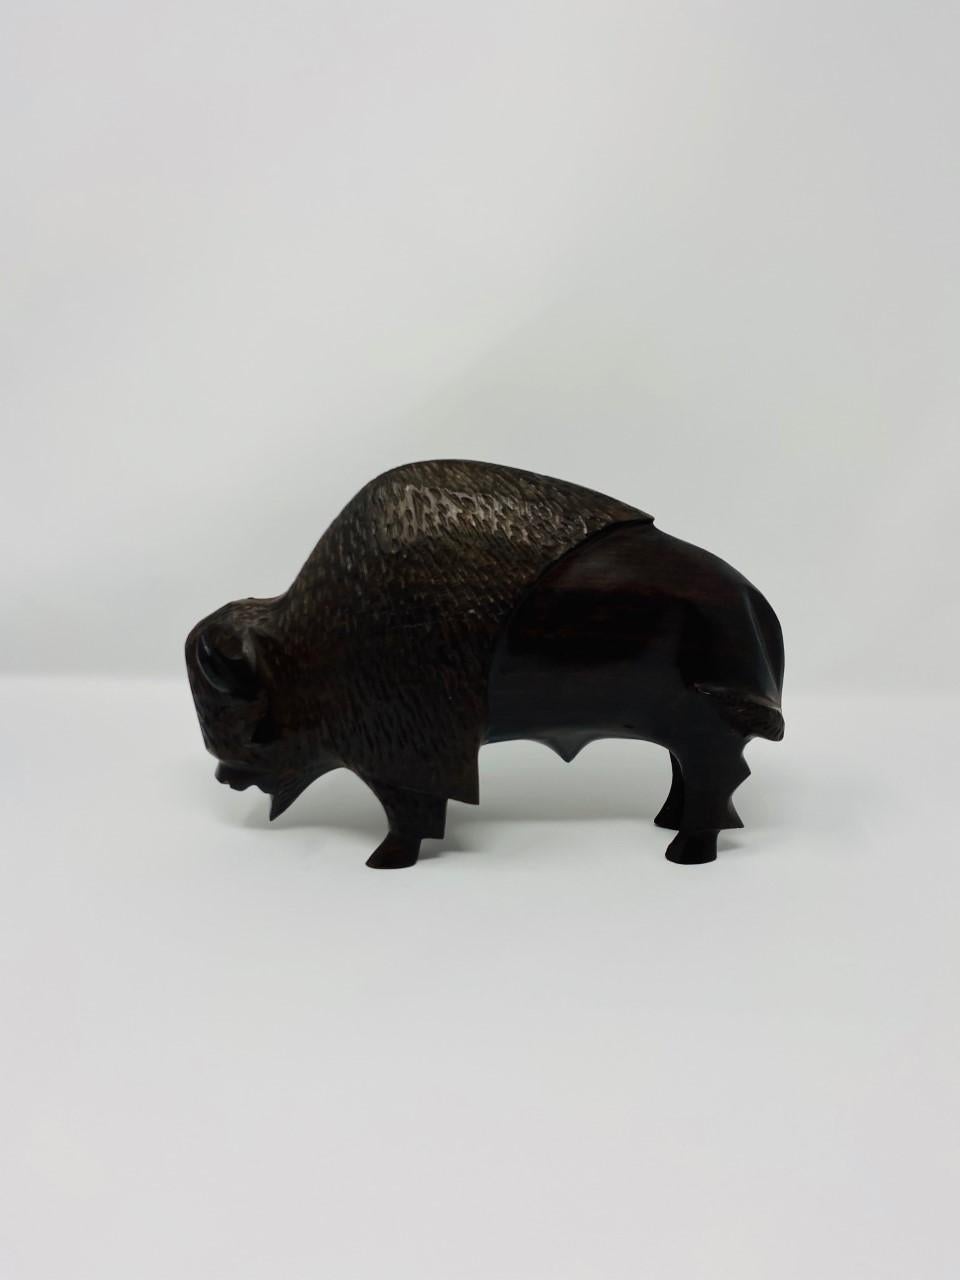 Vintage and beautifully carved buffalo sculpture. Meticulously carved and etched resulting in an amazingly smooth and hard finish achieved with no lacquer or varnish. Due to its extreme density, it is resistant to water, scratches and stains. The